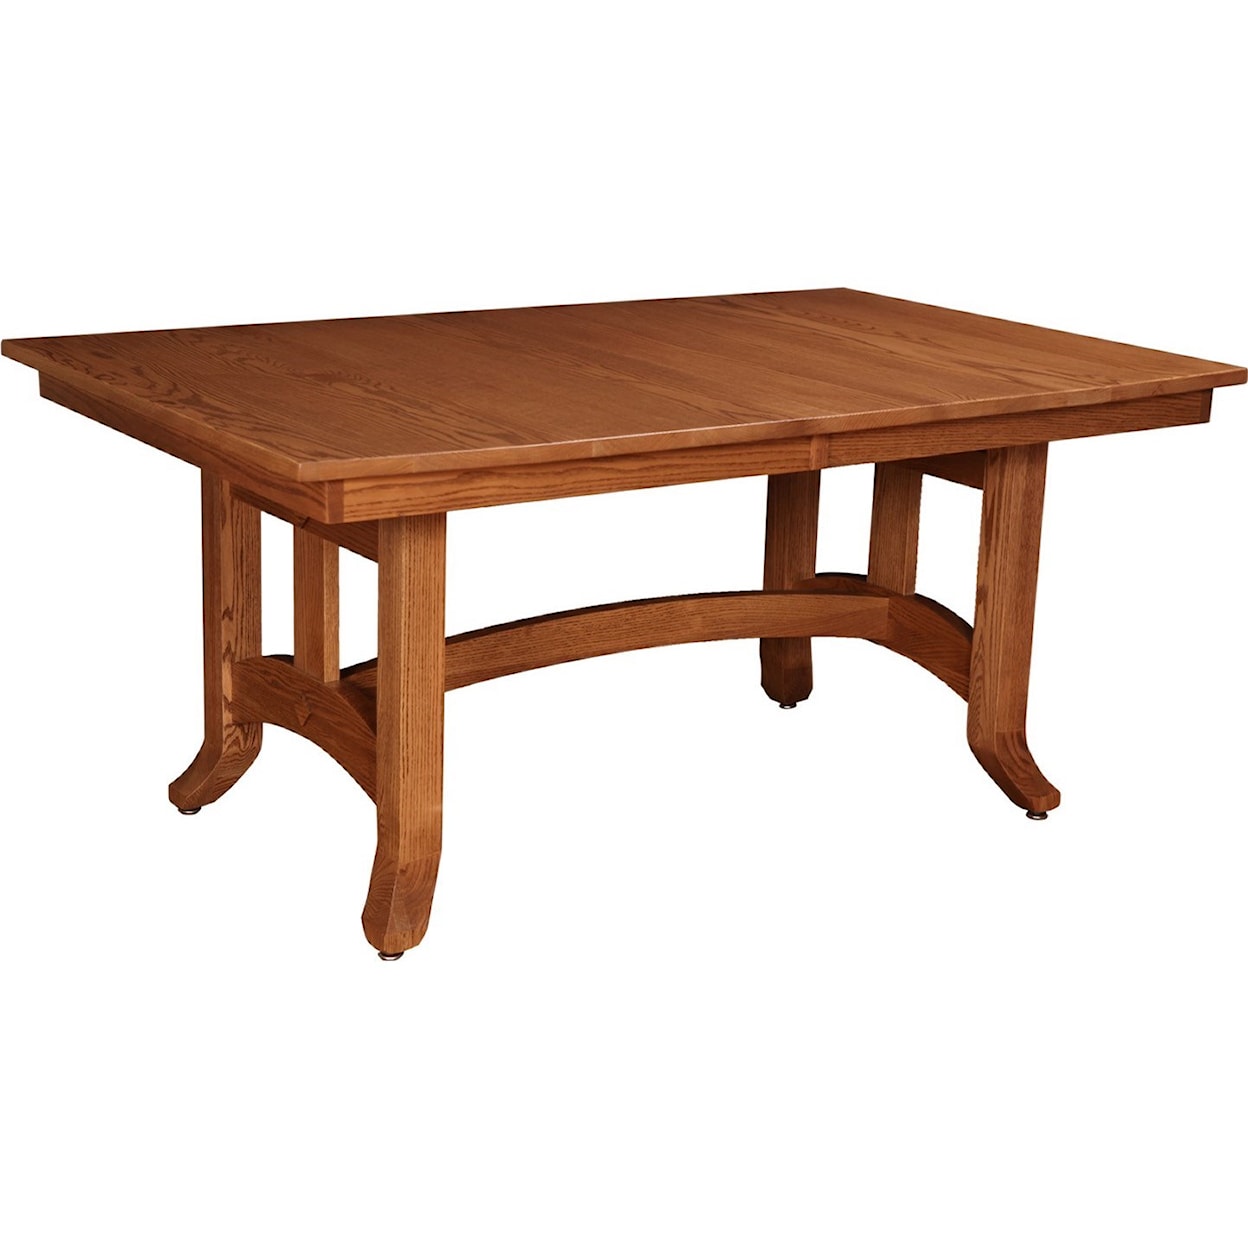 Trailway Wood Biltmore Table and Chair Set